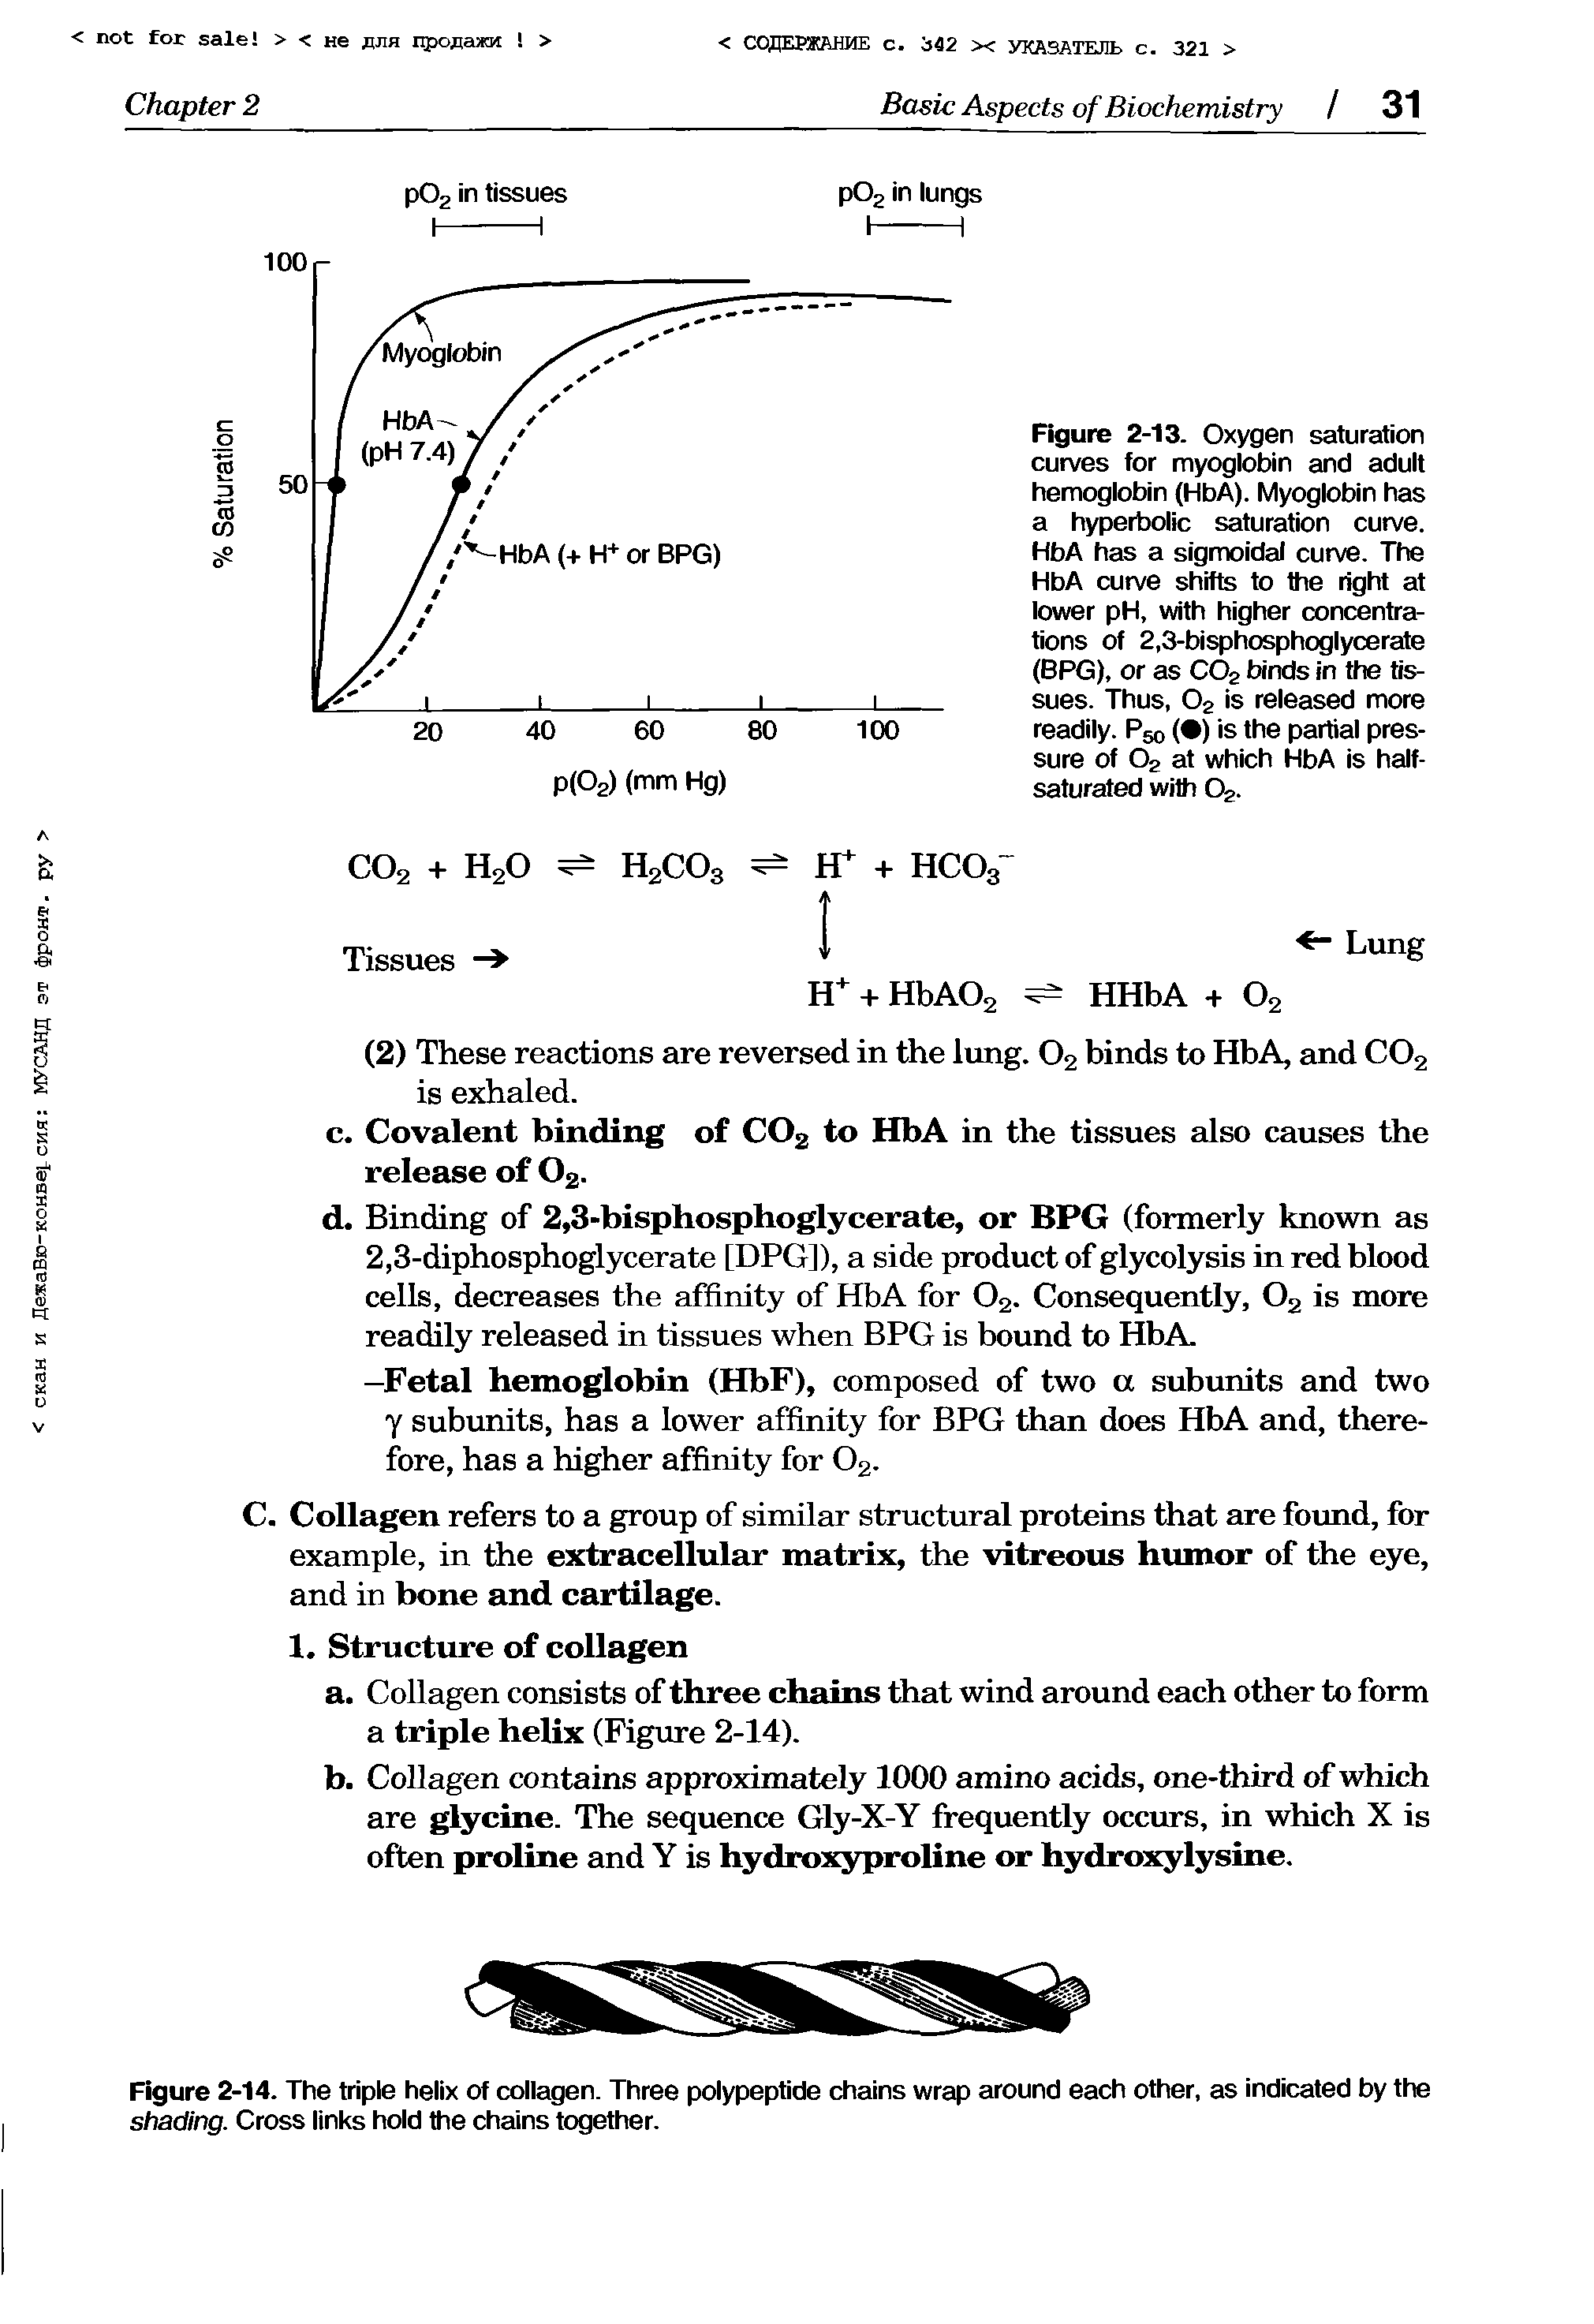 Figure 2-13. Oxygen saturation curves for myoglobin and adult hemoglobin (HbA). Myoglobin has a hyperbolic saturation curve. HbA has a sigmoidal curve. The HbA curve shifts to the right at lower pH, with higher concentrations of 2,3-bisphosphoglycerate (BPG), or as C02 binds in the tissues. Thus, 02 is released more readily. P50 ( ) is the partial pressure of 02 at which HbA is half-saturated with 02.